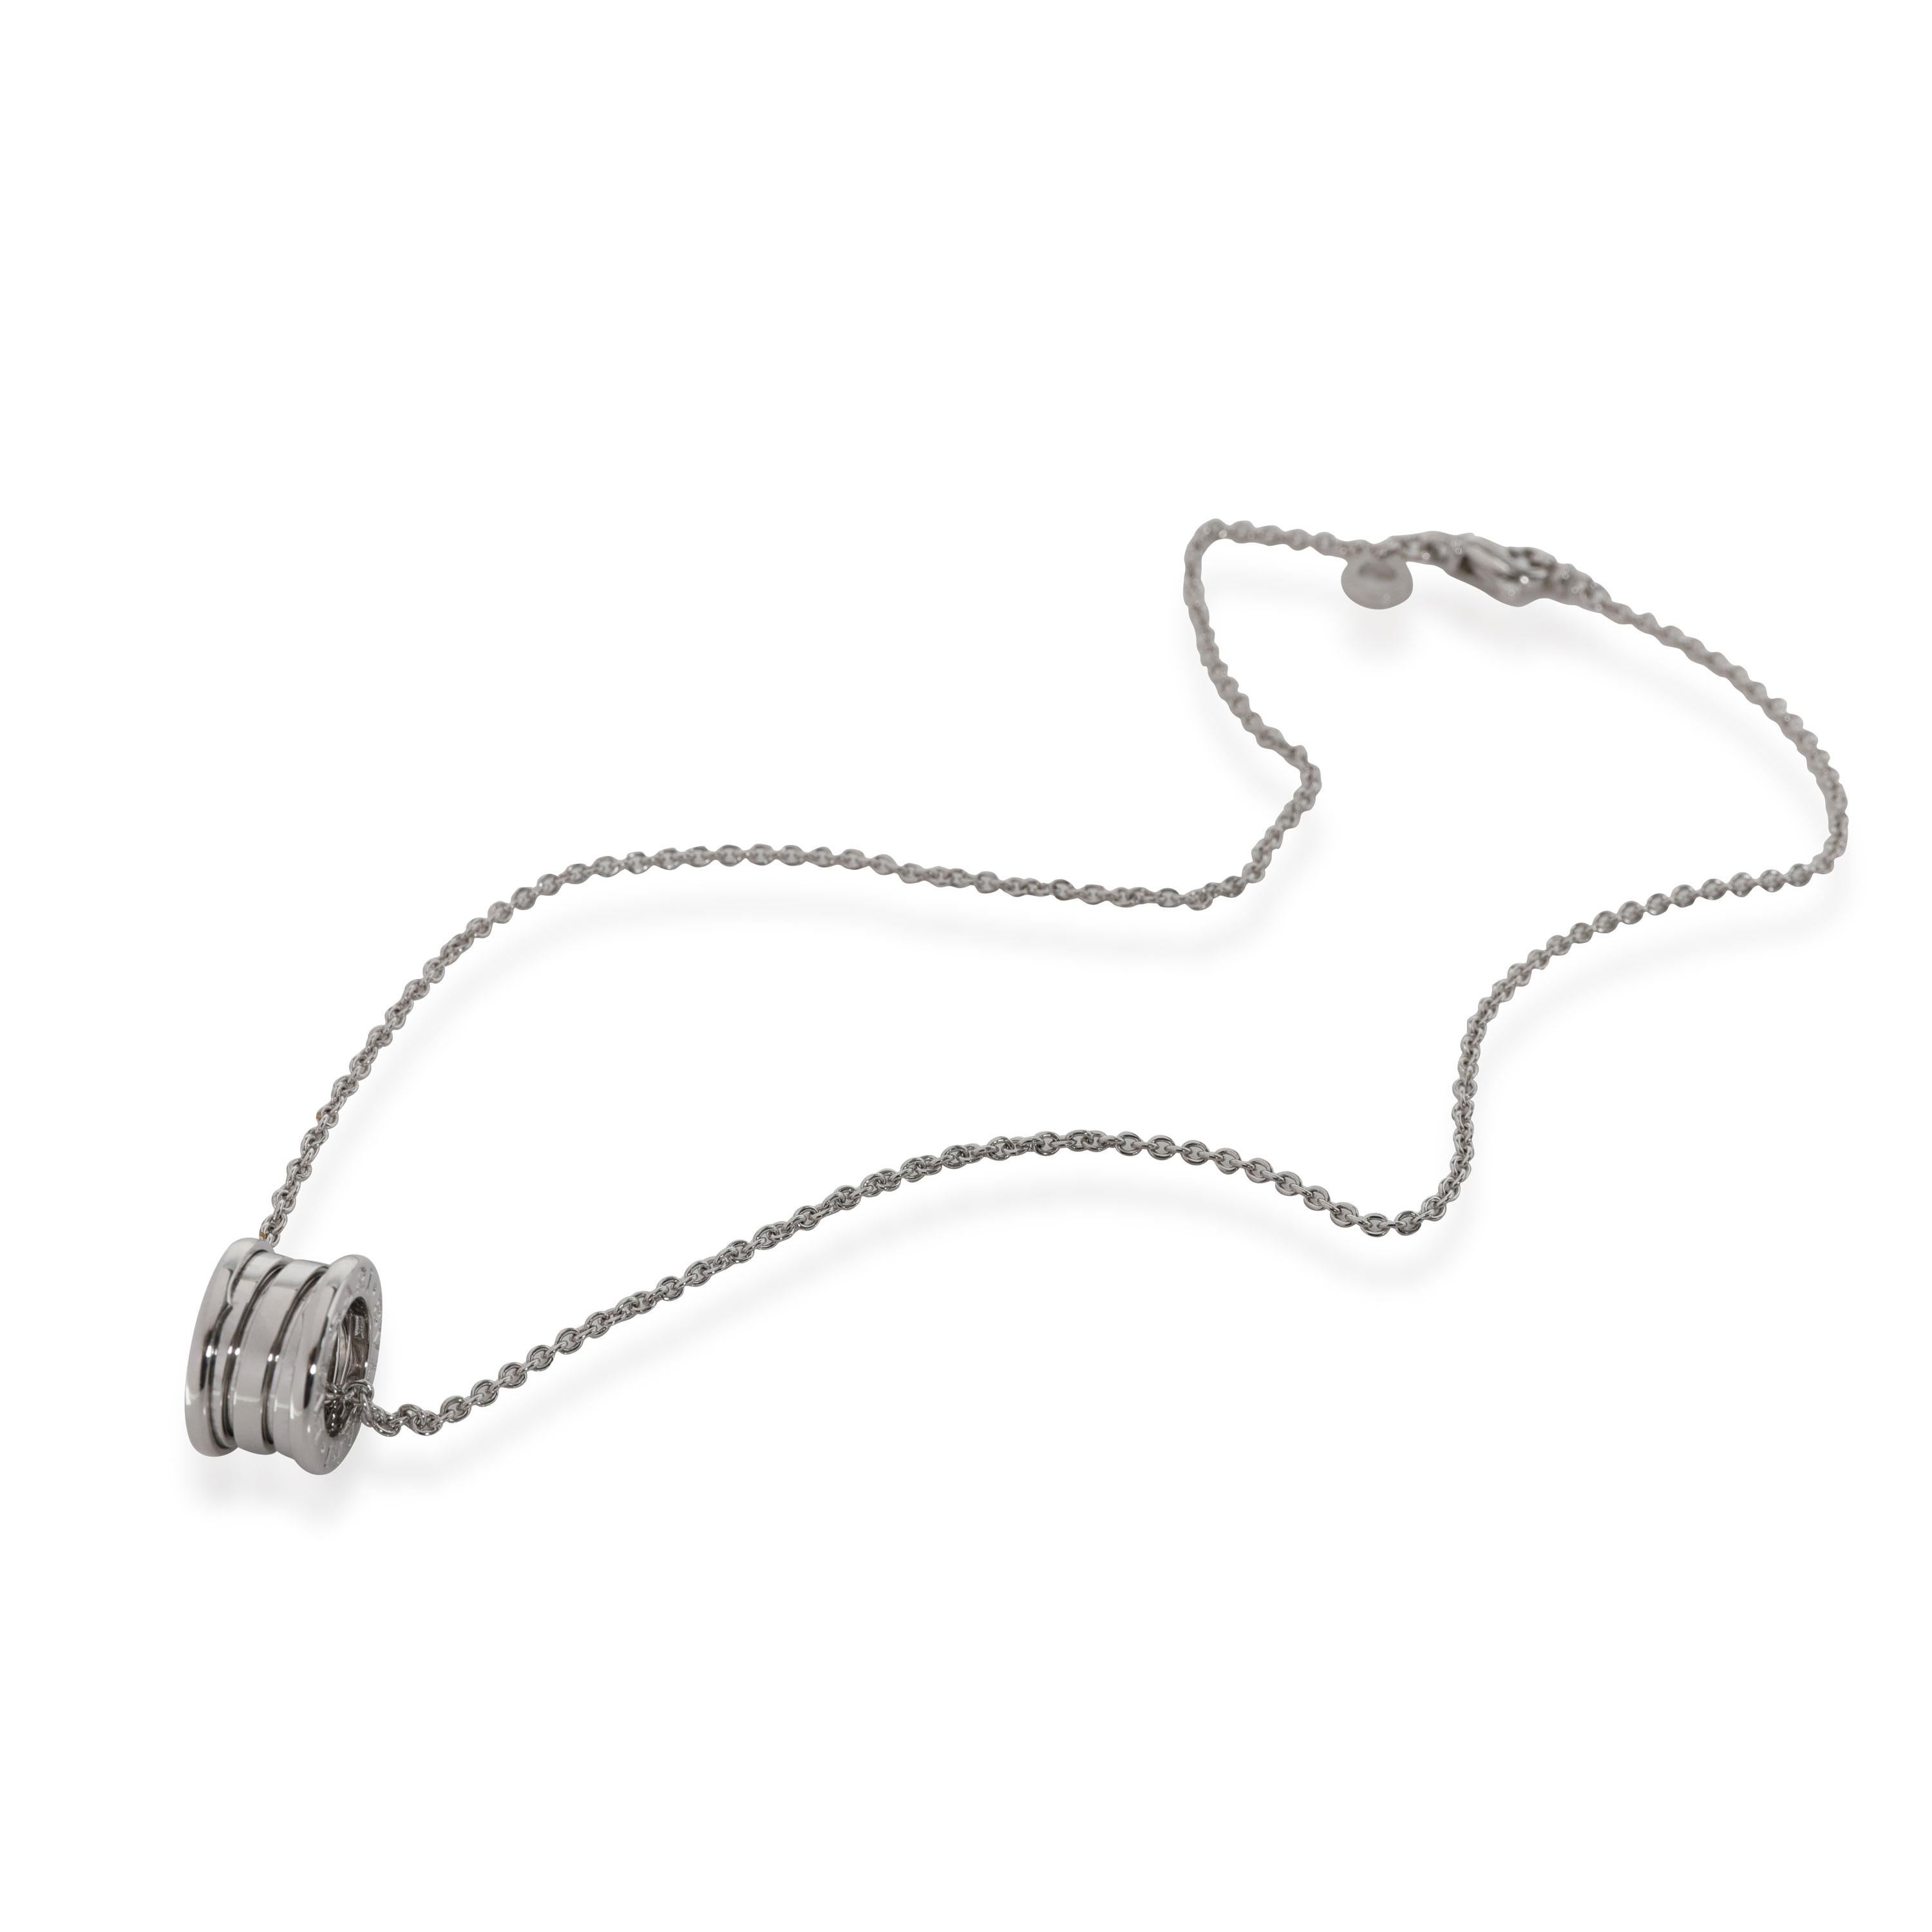 Bulgari B.Zero1 Fashion Necklace in 18k White Gold

PRIMARY DETAILS
SKU: 114988
Listing Title: Bulgari B.Zero1 Fashion Necklace in 18k White Gold
Condition Description: Retails for 3950 USD. In excellent condition and recently polished. Chain is 16